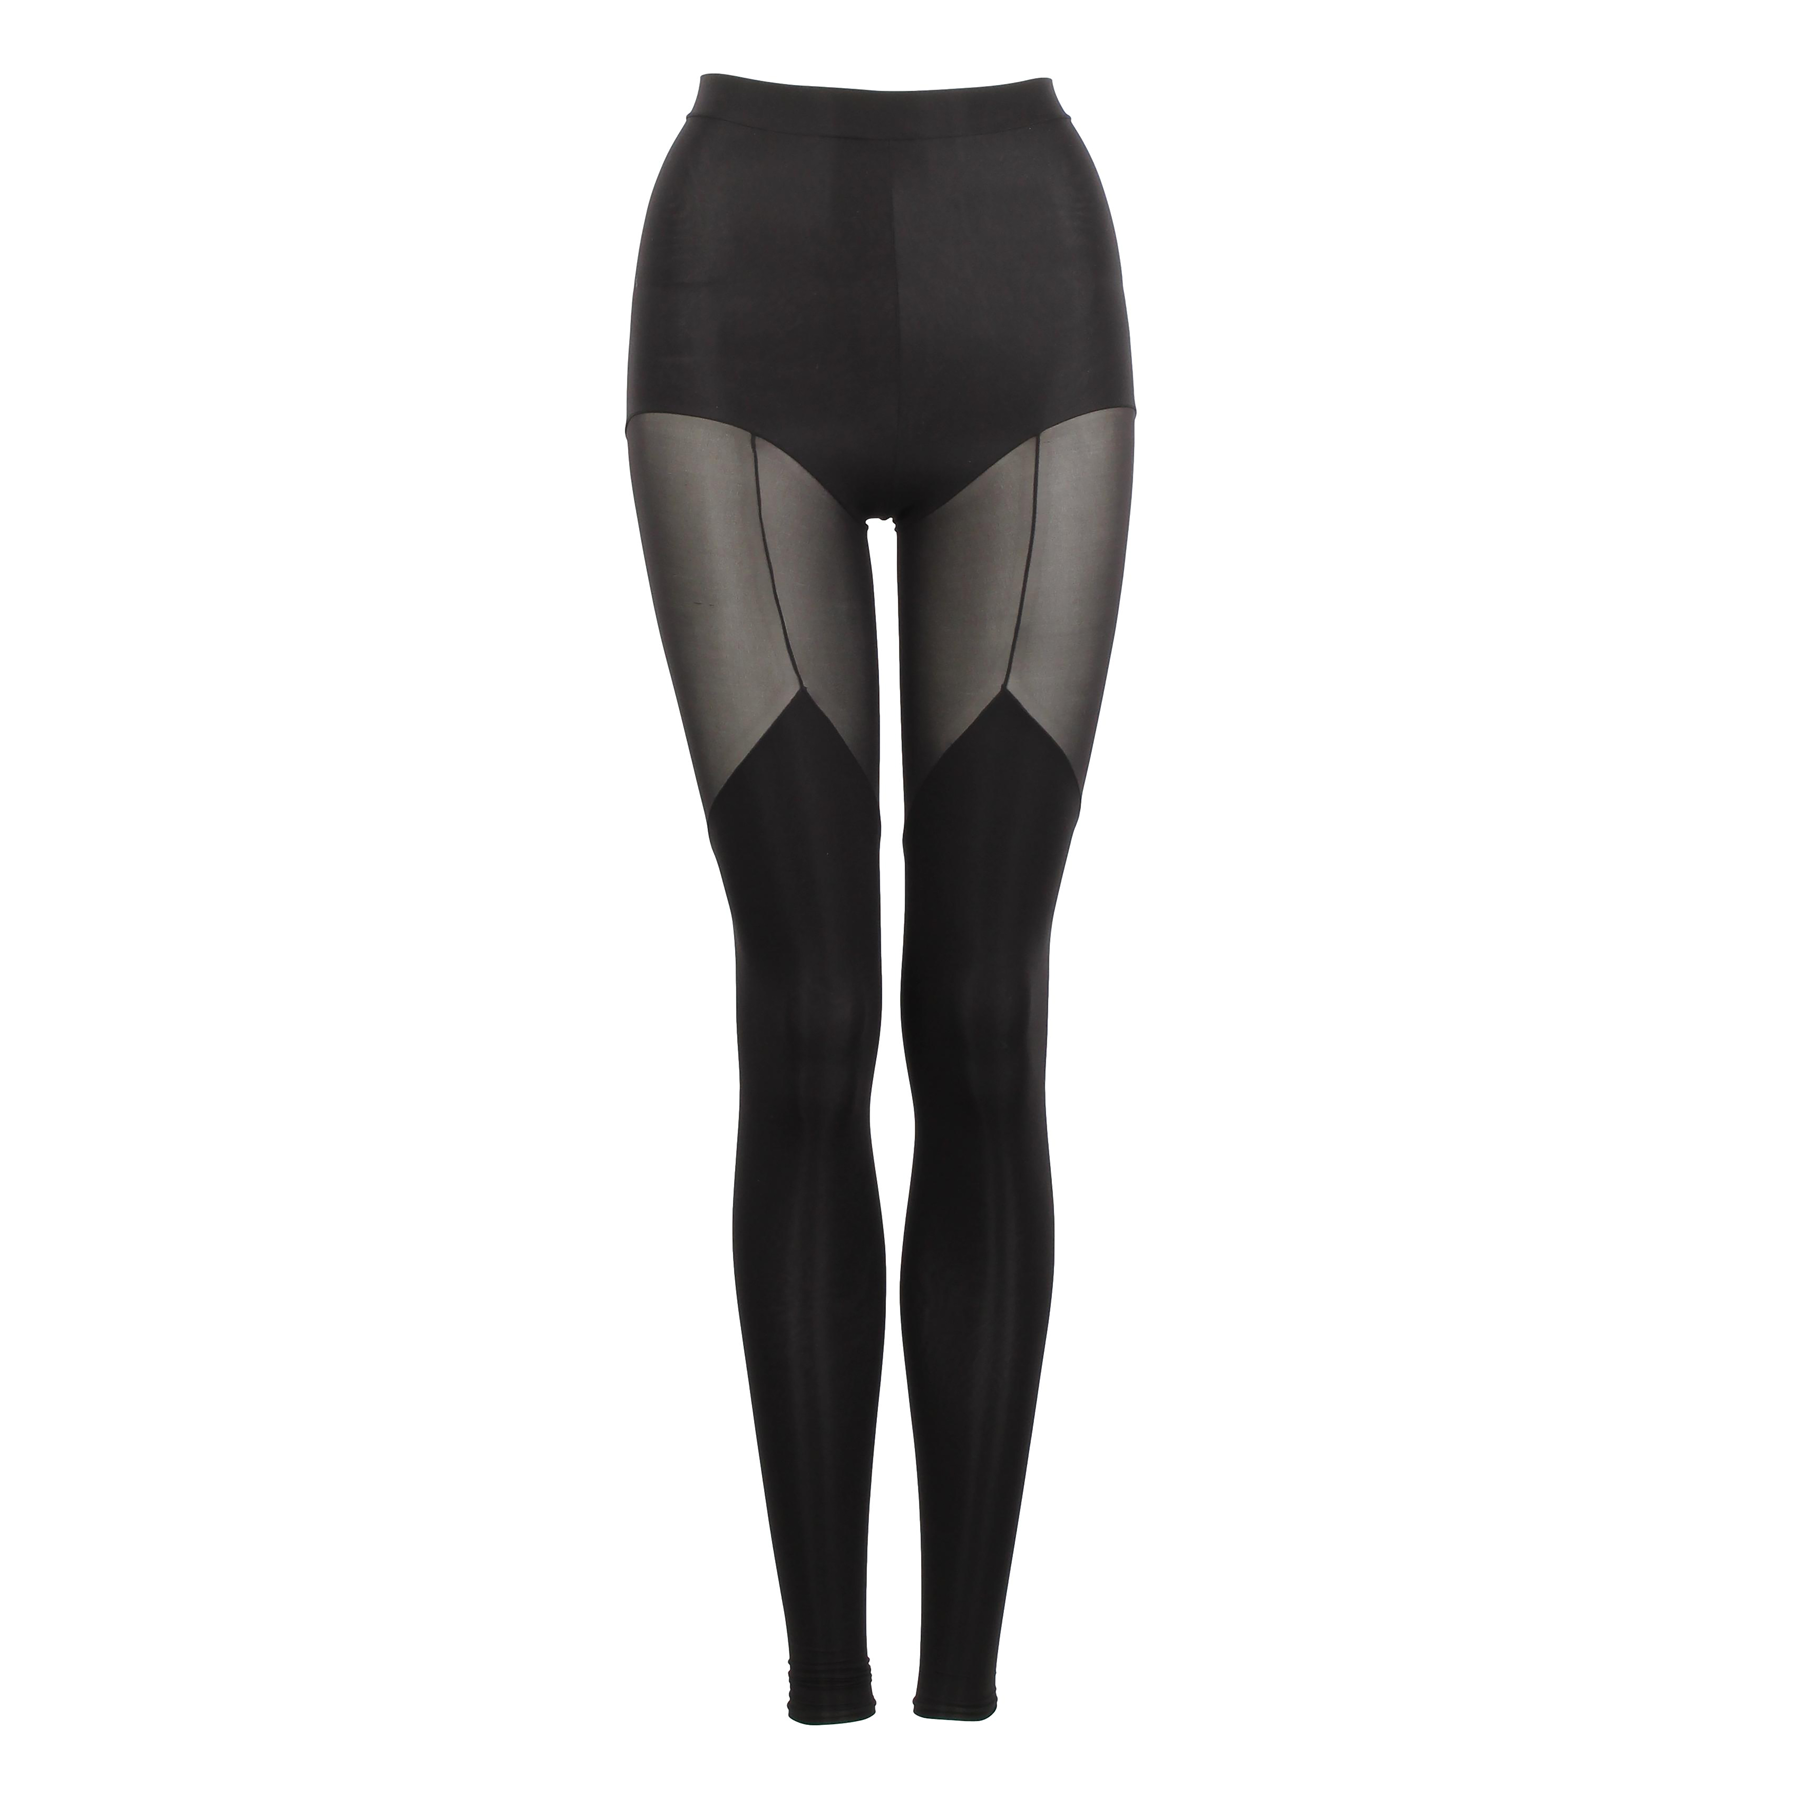 Jung high waisted leggings by DSTM